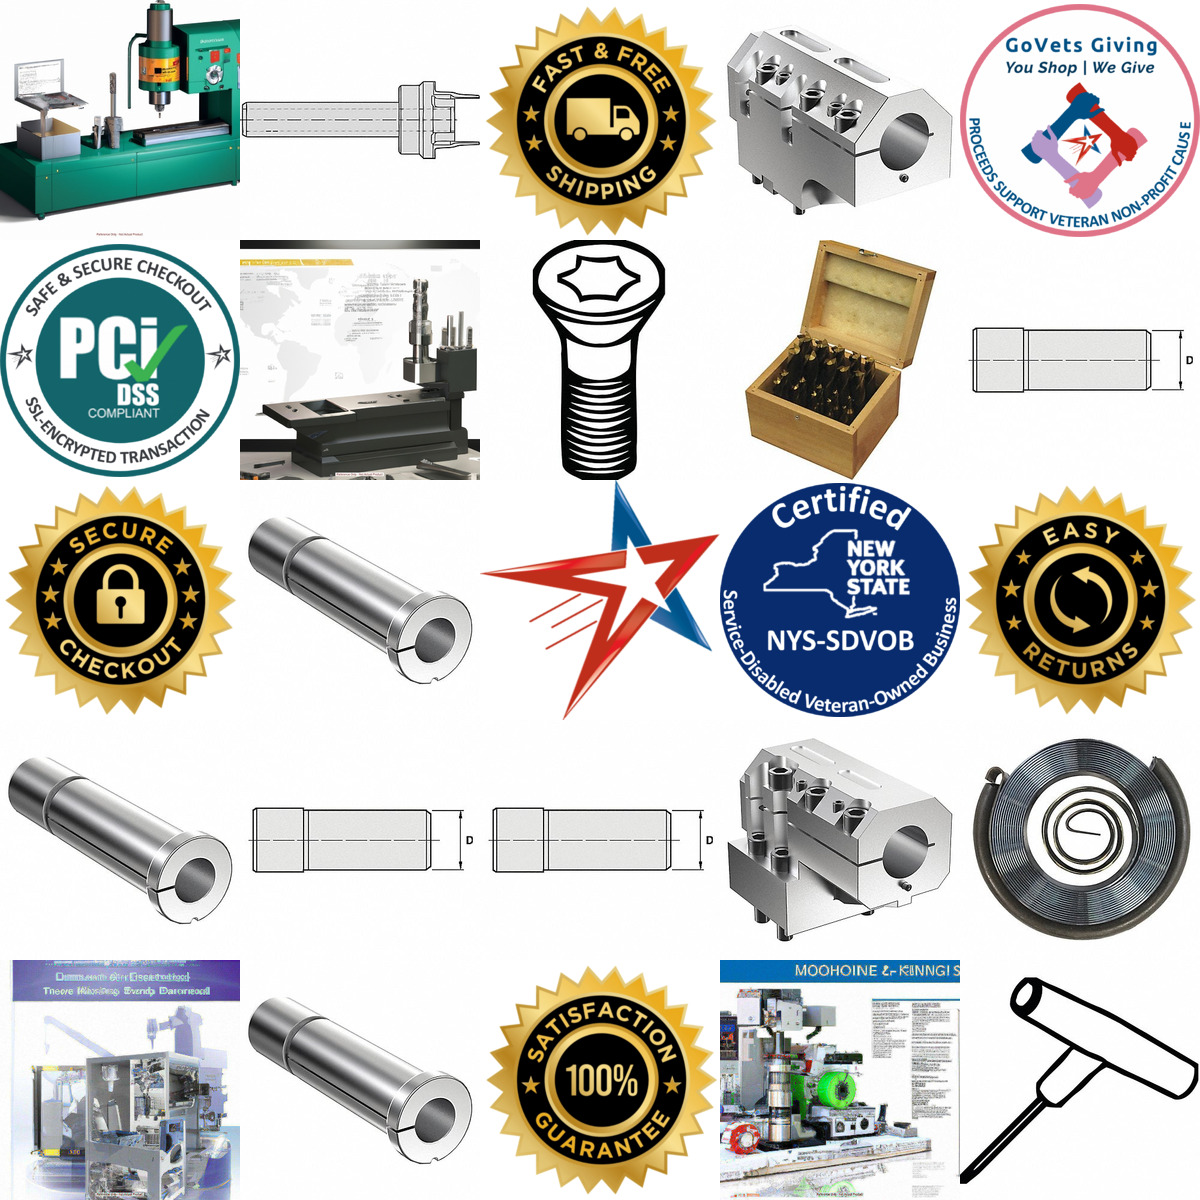 A selection of Milling Machine Attachments and Accessories products on GoVets